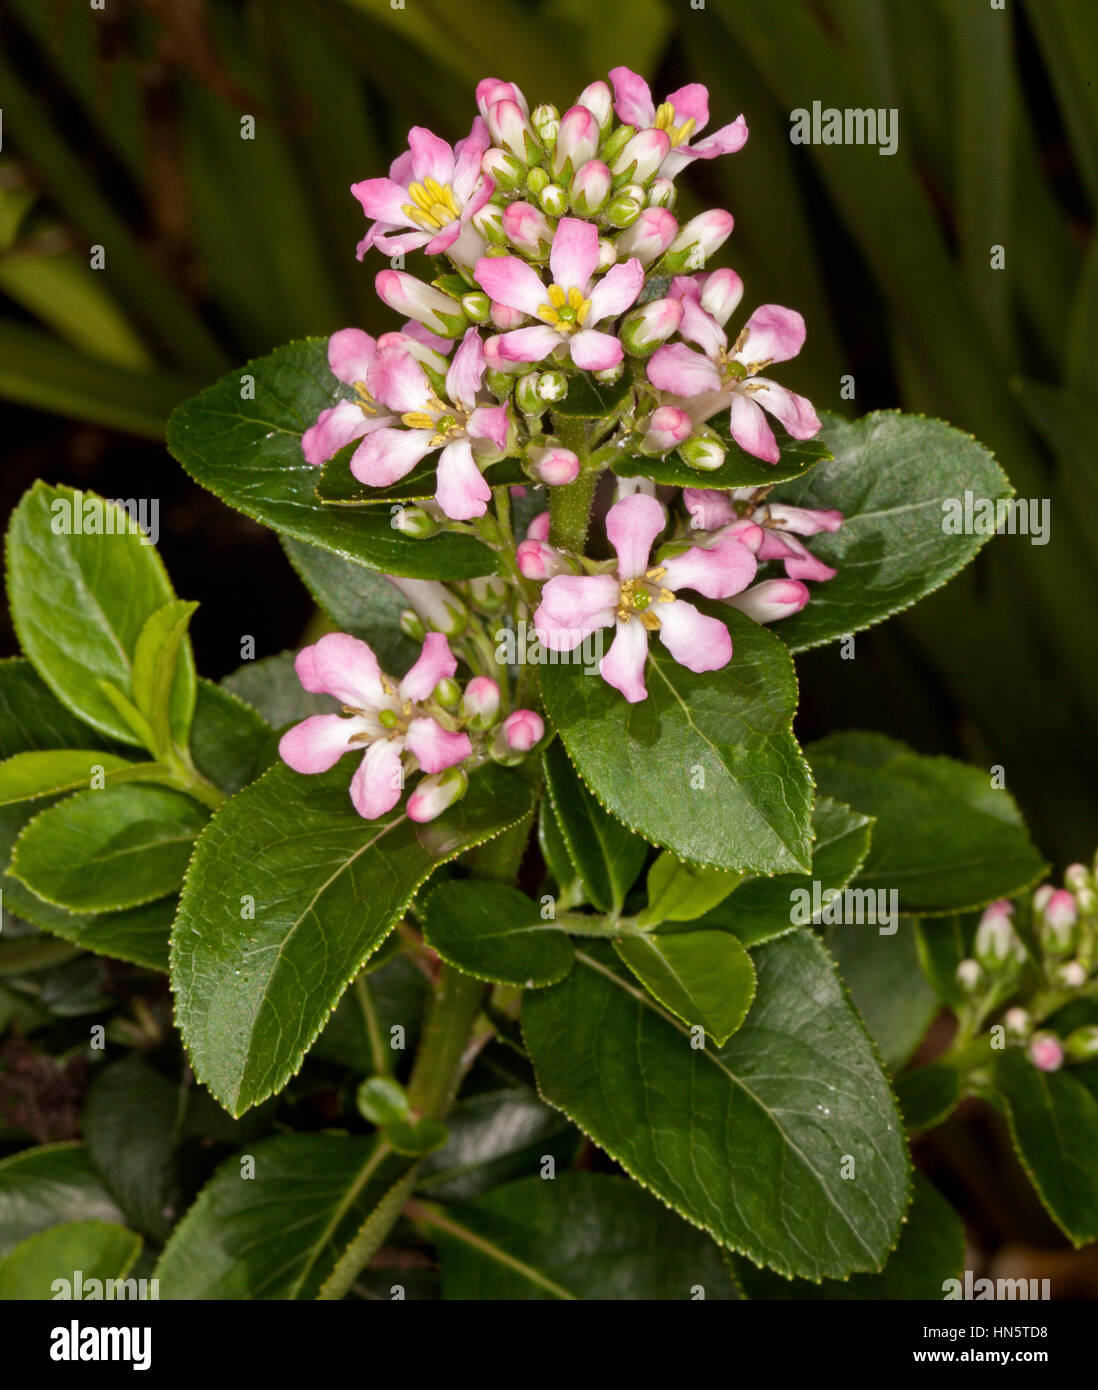 Cluster of pale pink and white flowers of evergreen garden shrub Escallonia laevis 'Pink Elle' on background of dark green leaves Stock Photo